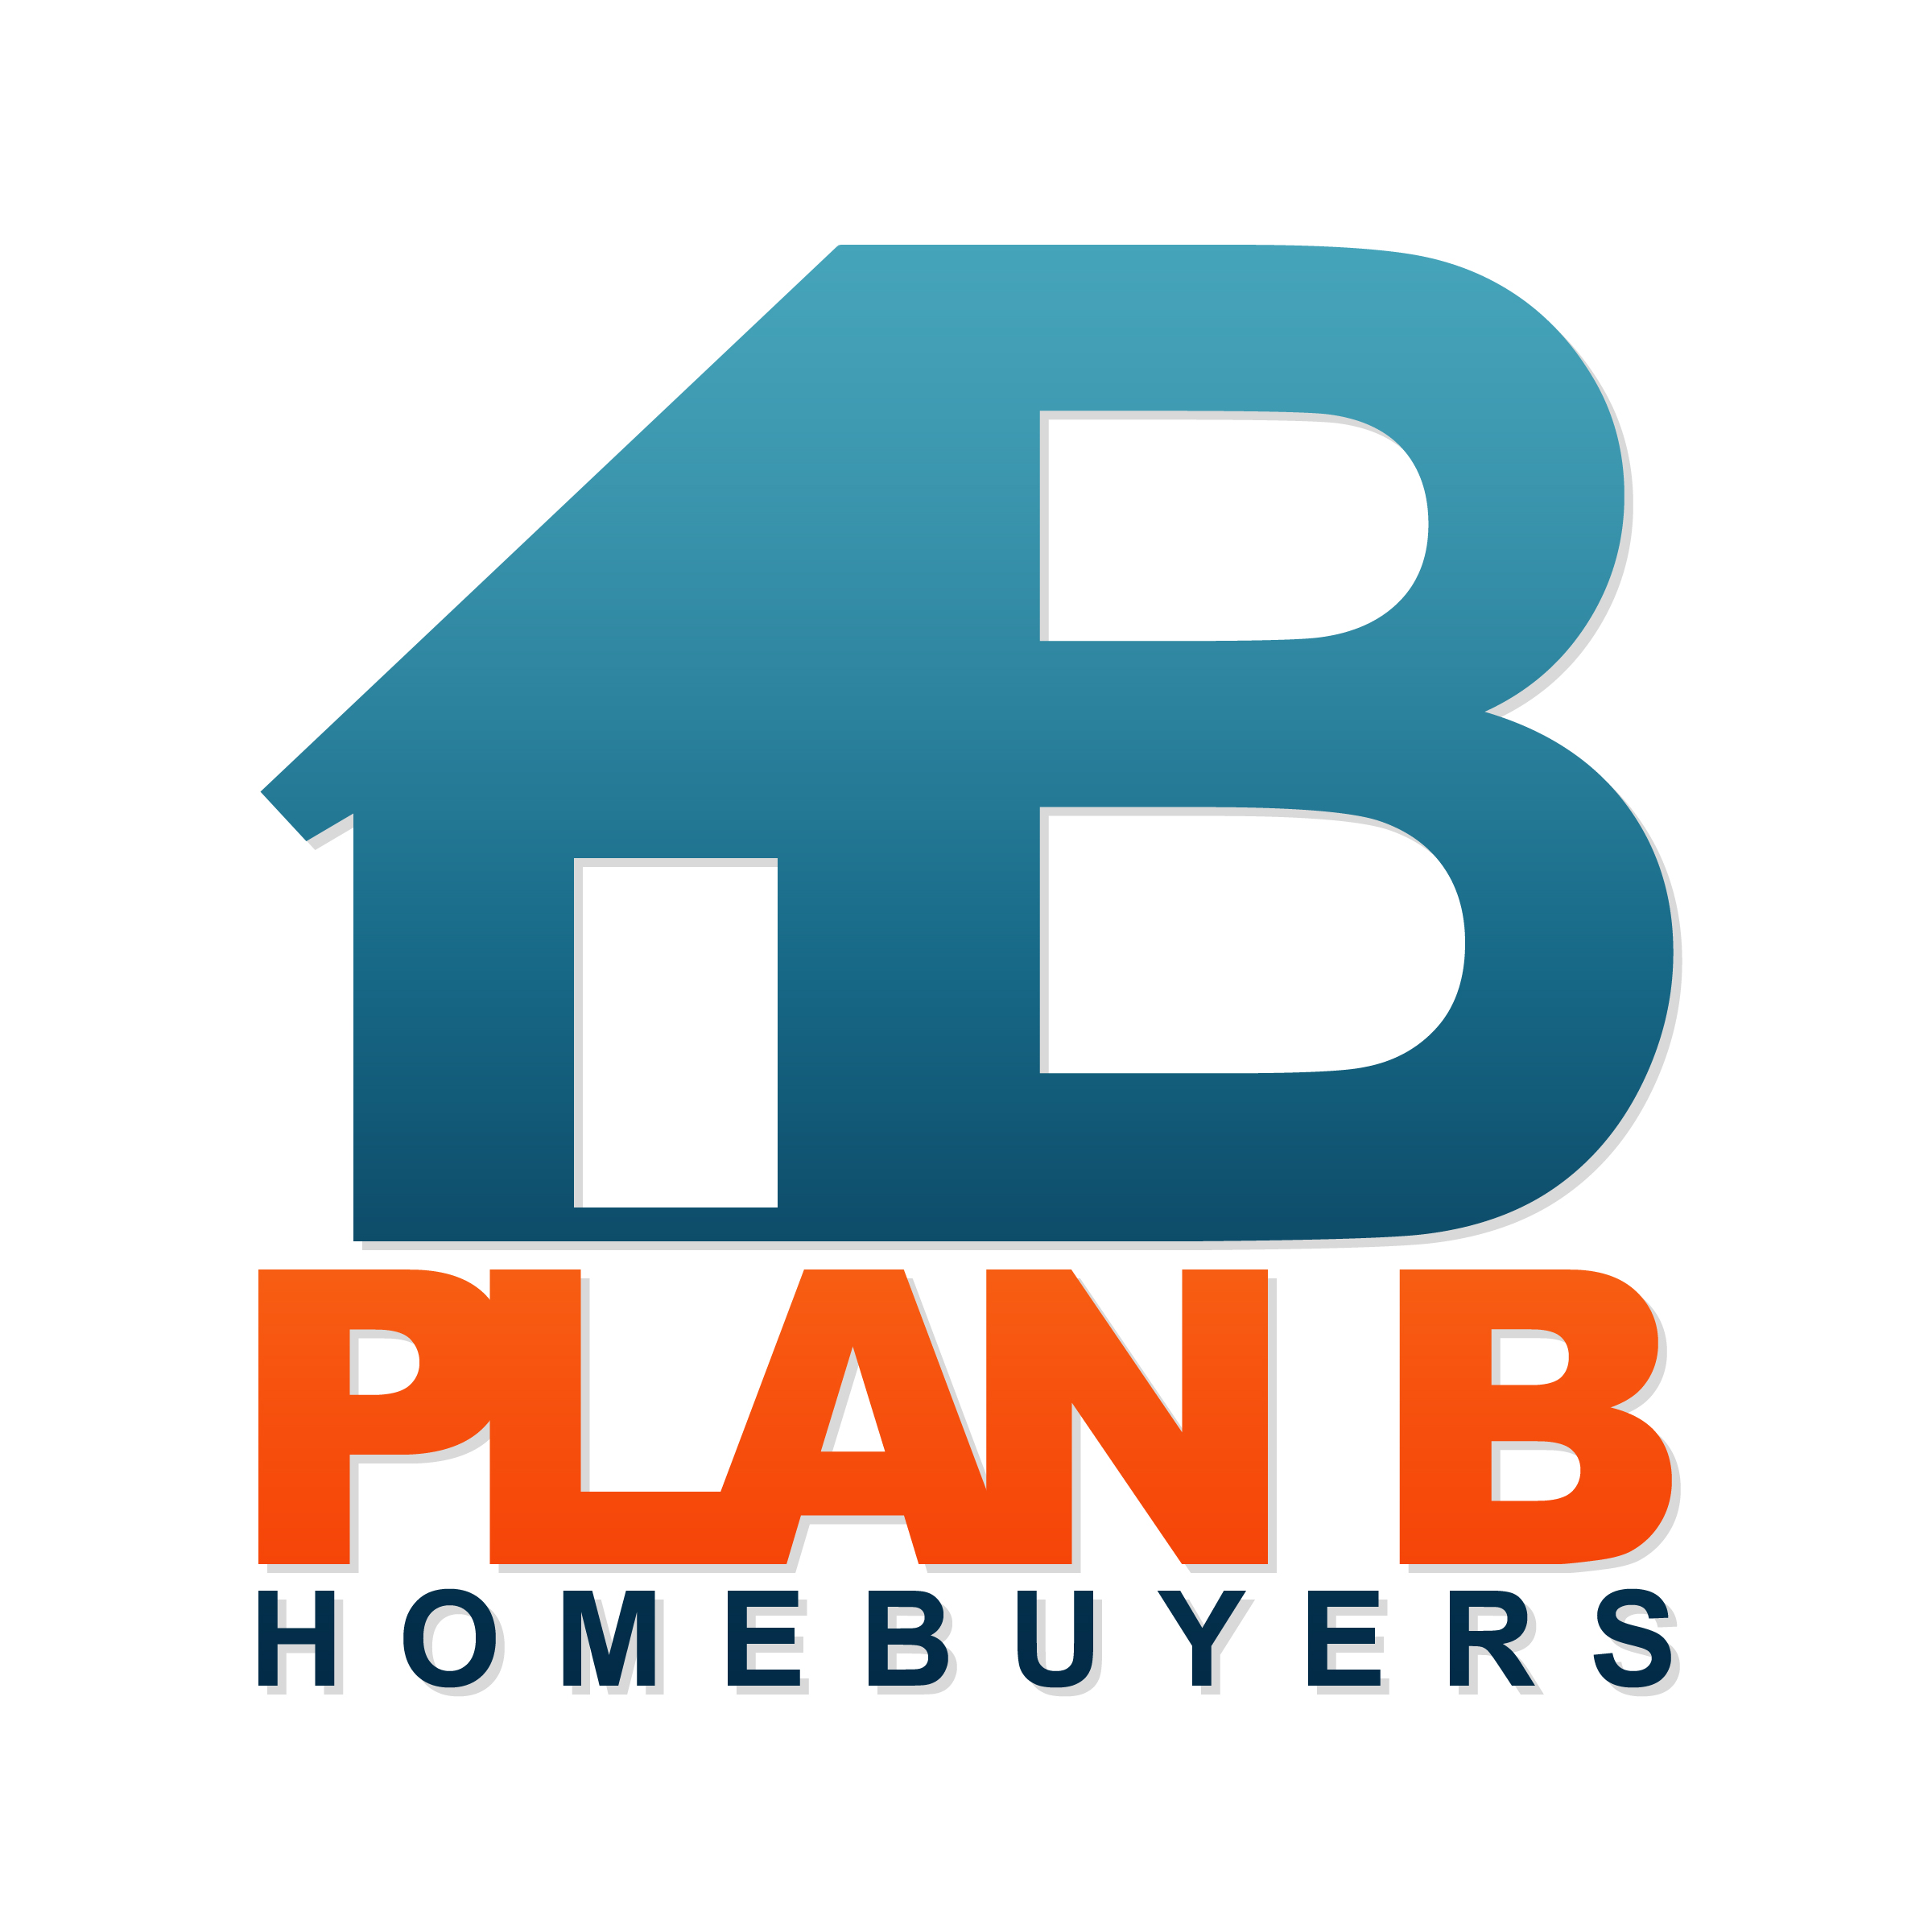 Plan B HomeBuyers Announces That They Buy Homes Faster in Milwaukee, Wisconsin 